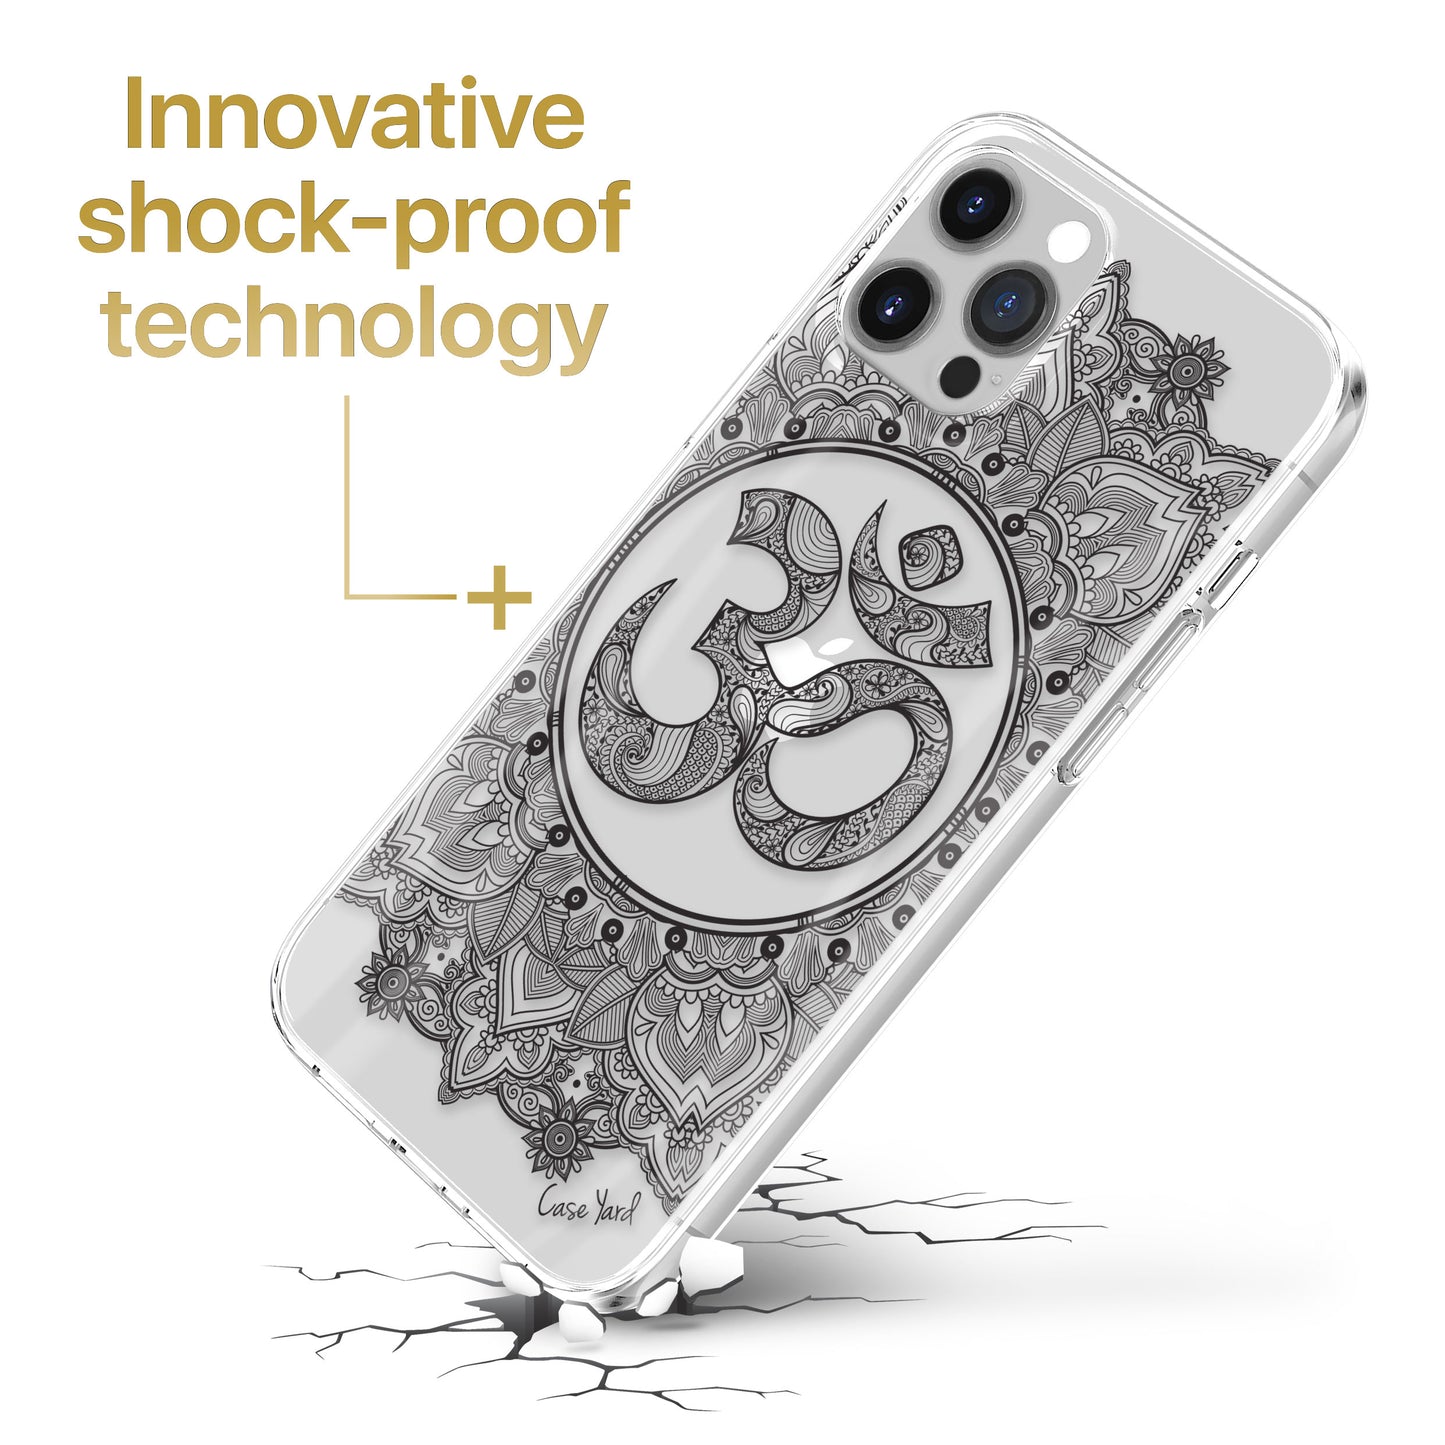 TPU Case Clear case with (Royal Ohm Mandala) Design for iPhone & Samsung Phones